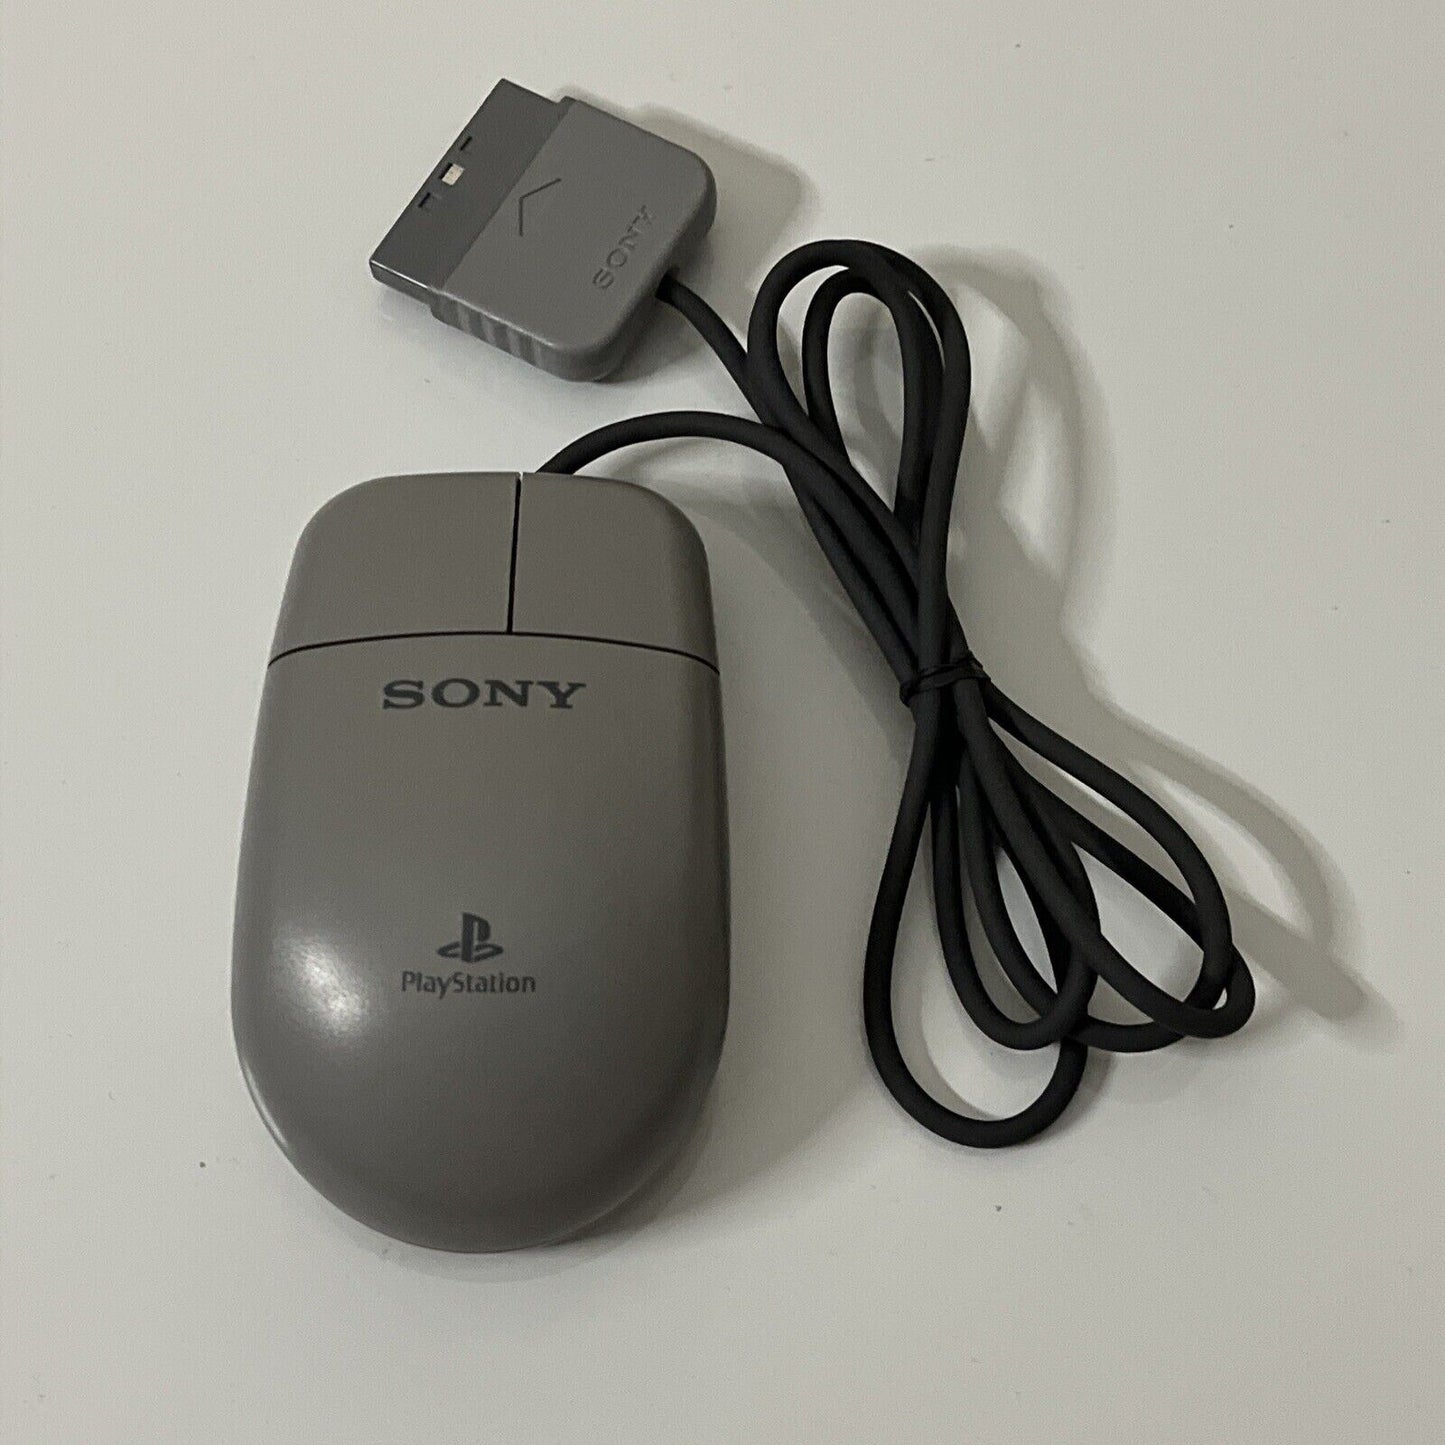 Genuine Official Sony PlayStation Mouse For PS1 PS2 SCPH-1030